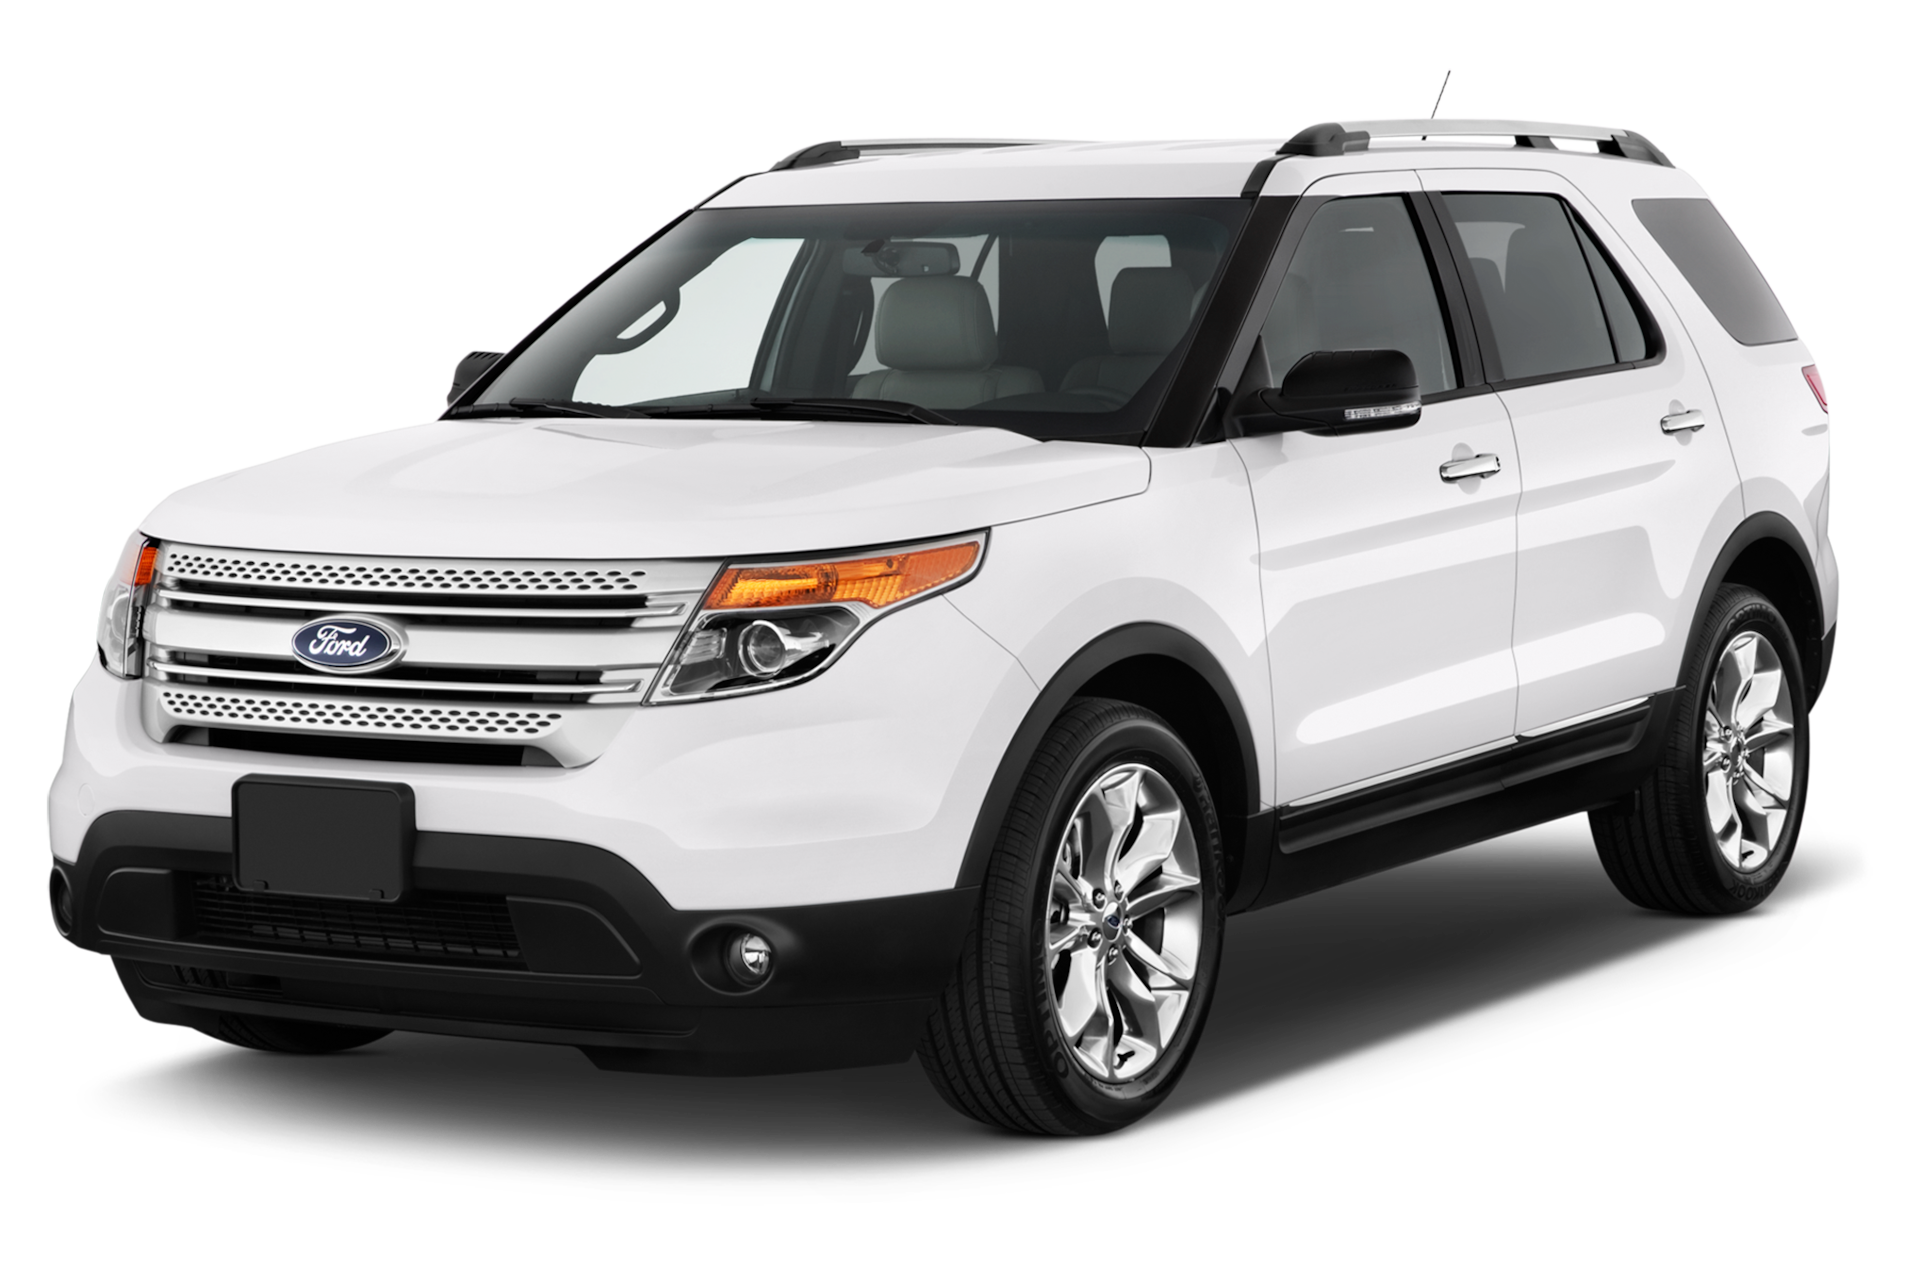 2012 Ford Explorer Prices, Reviews, and Photos - MotorTrend